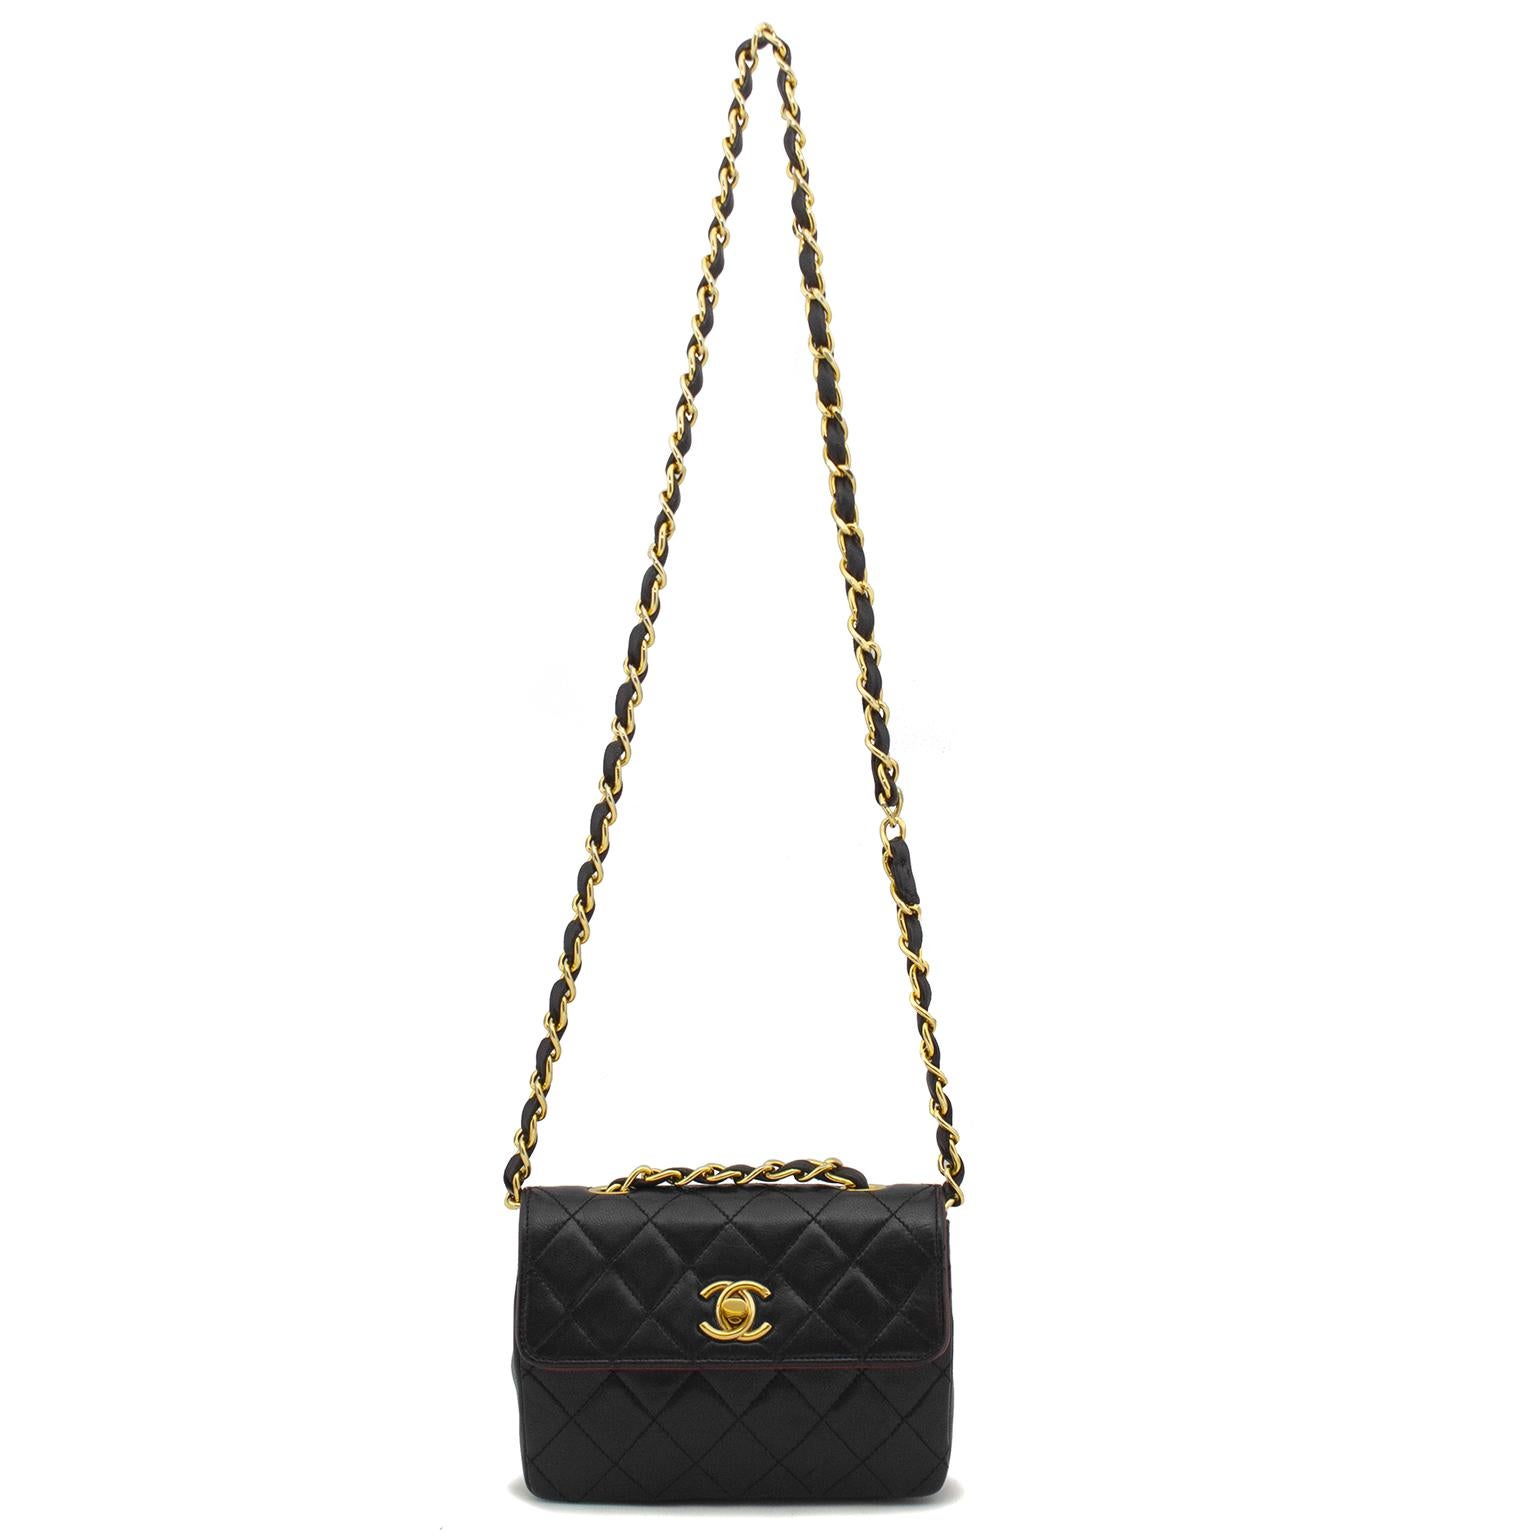 1990s black quilted leather vintage Chanel classic mini flap bag with gold-tone hardware, single chain-link and leather shoulder strap, CC gold-tone turn-lock closure at front flap. Includes dust bag and authenticity card. Excellent vintage